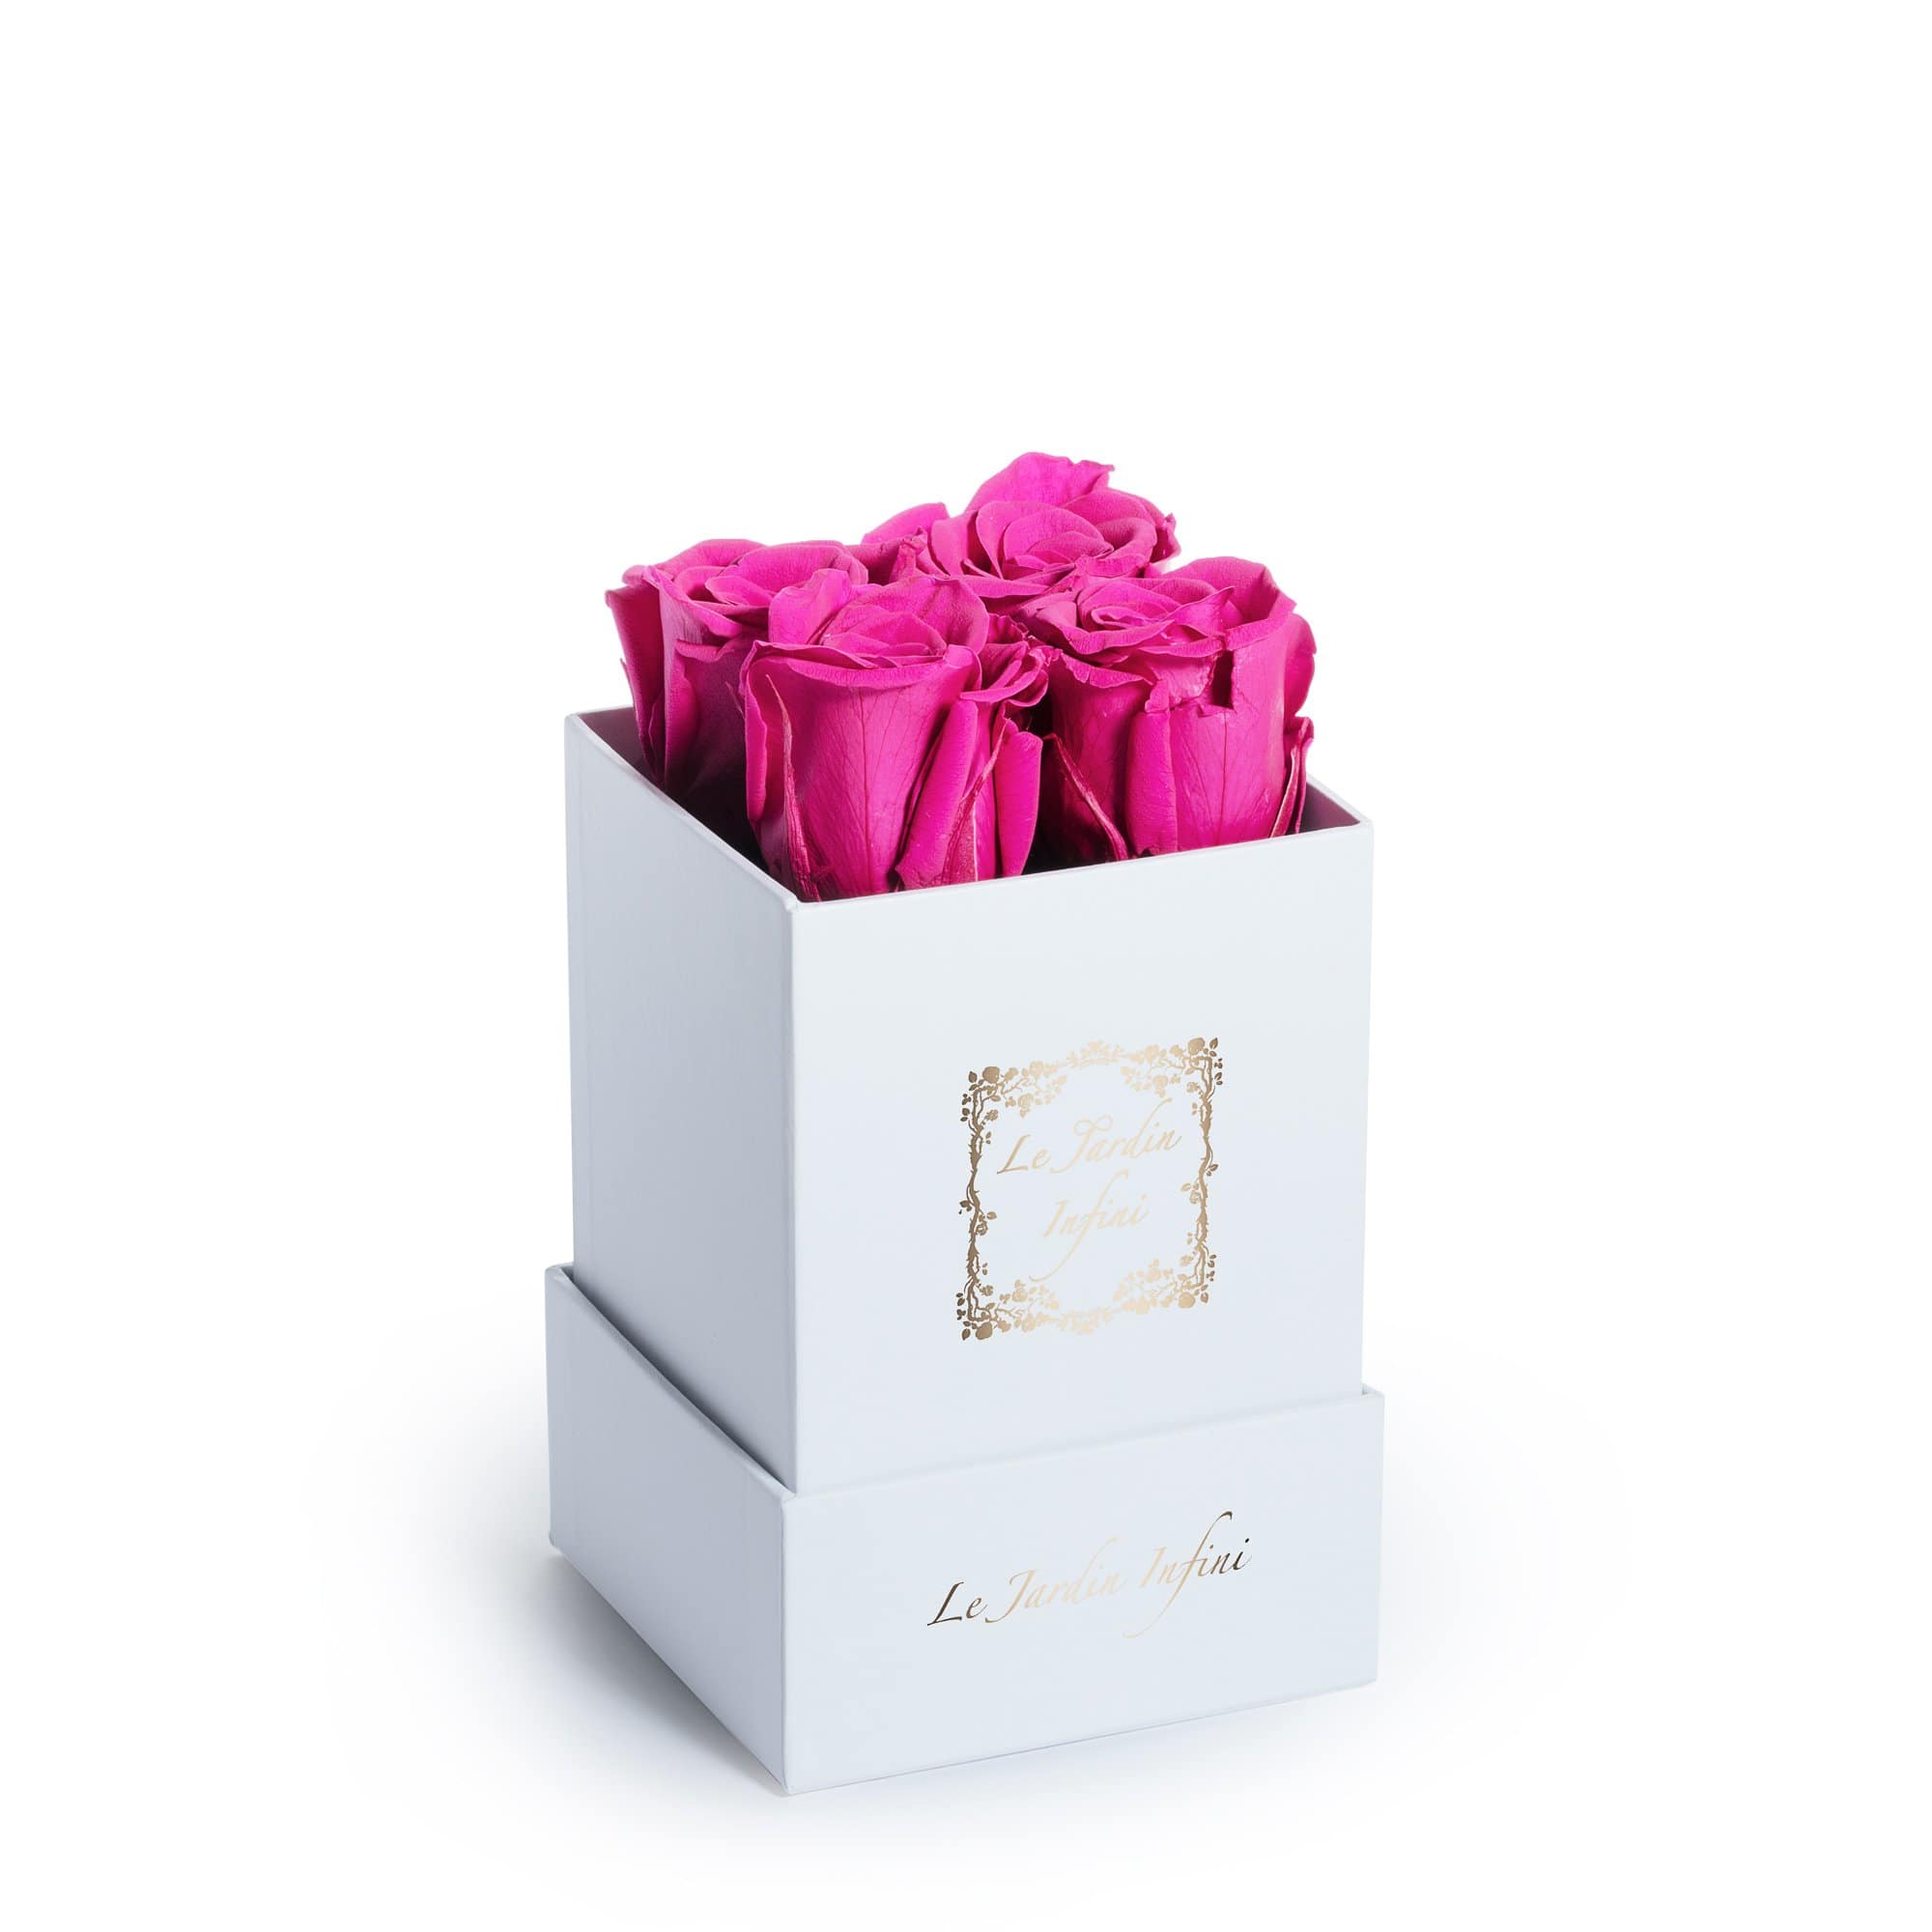 Hot Pink Roses in a box - Small Square White Box